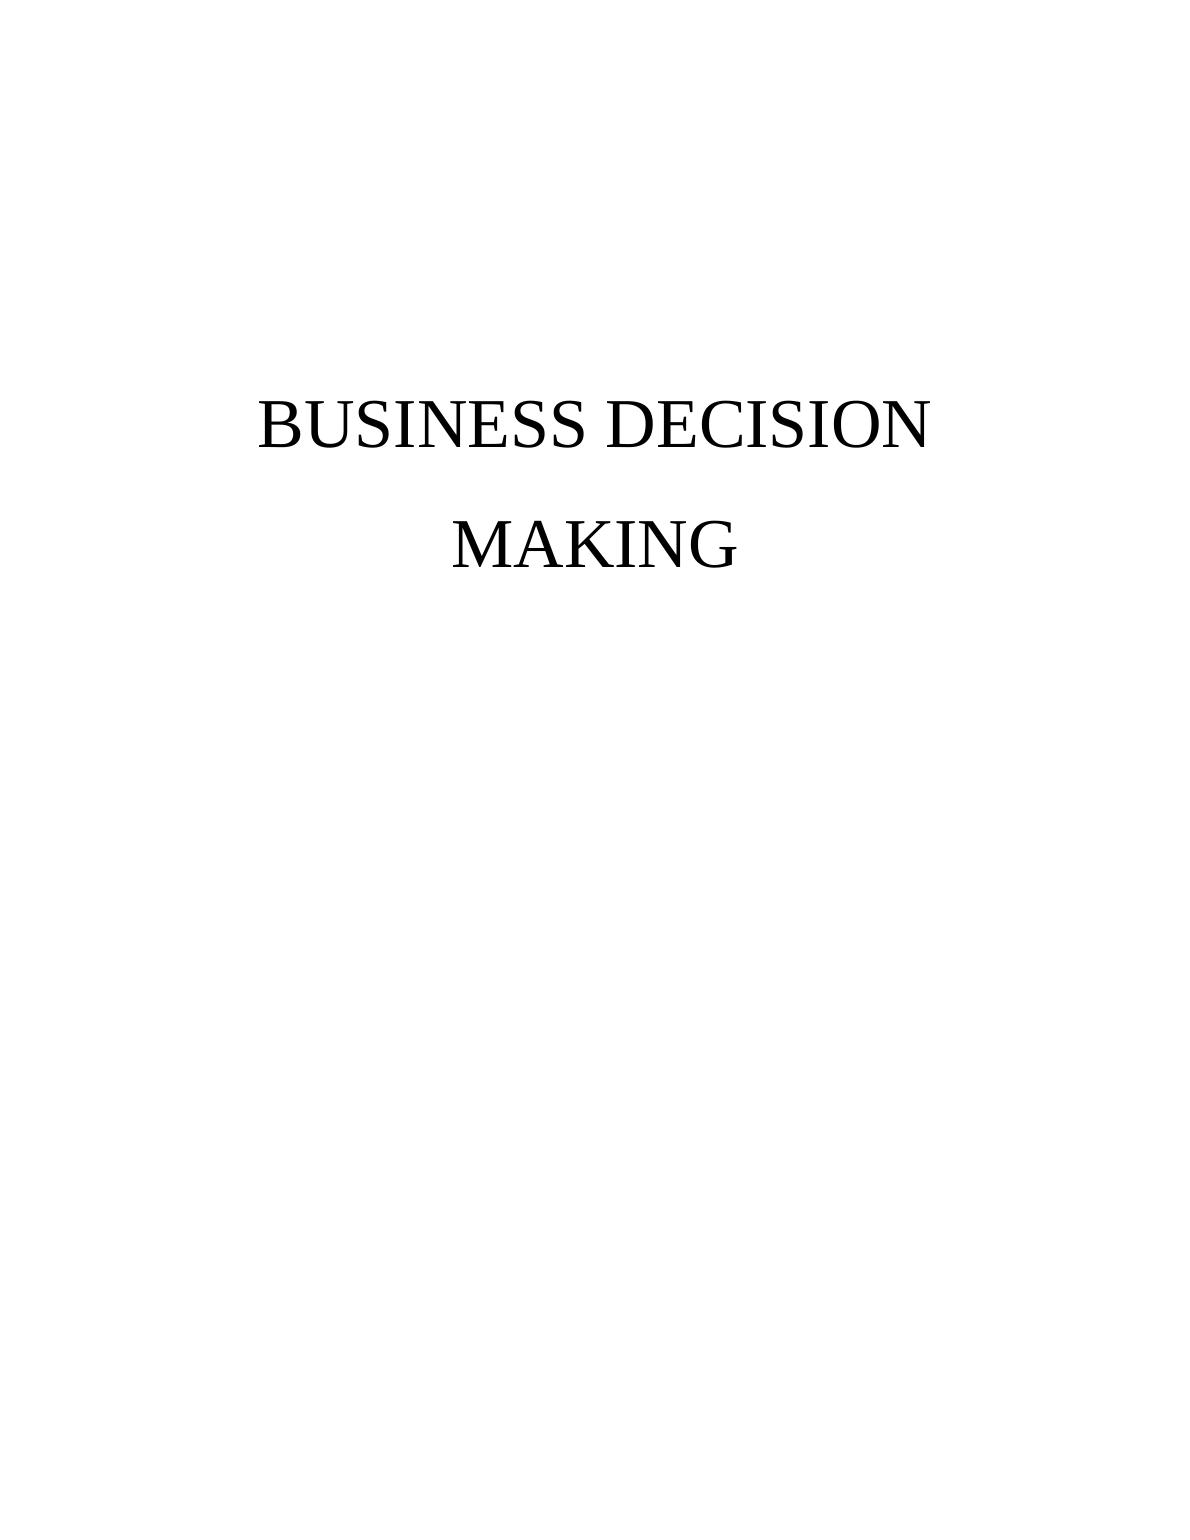 Business decision making table of contents introduction 3 TASK 13_1